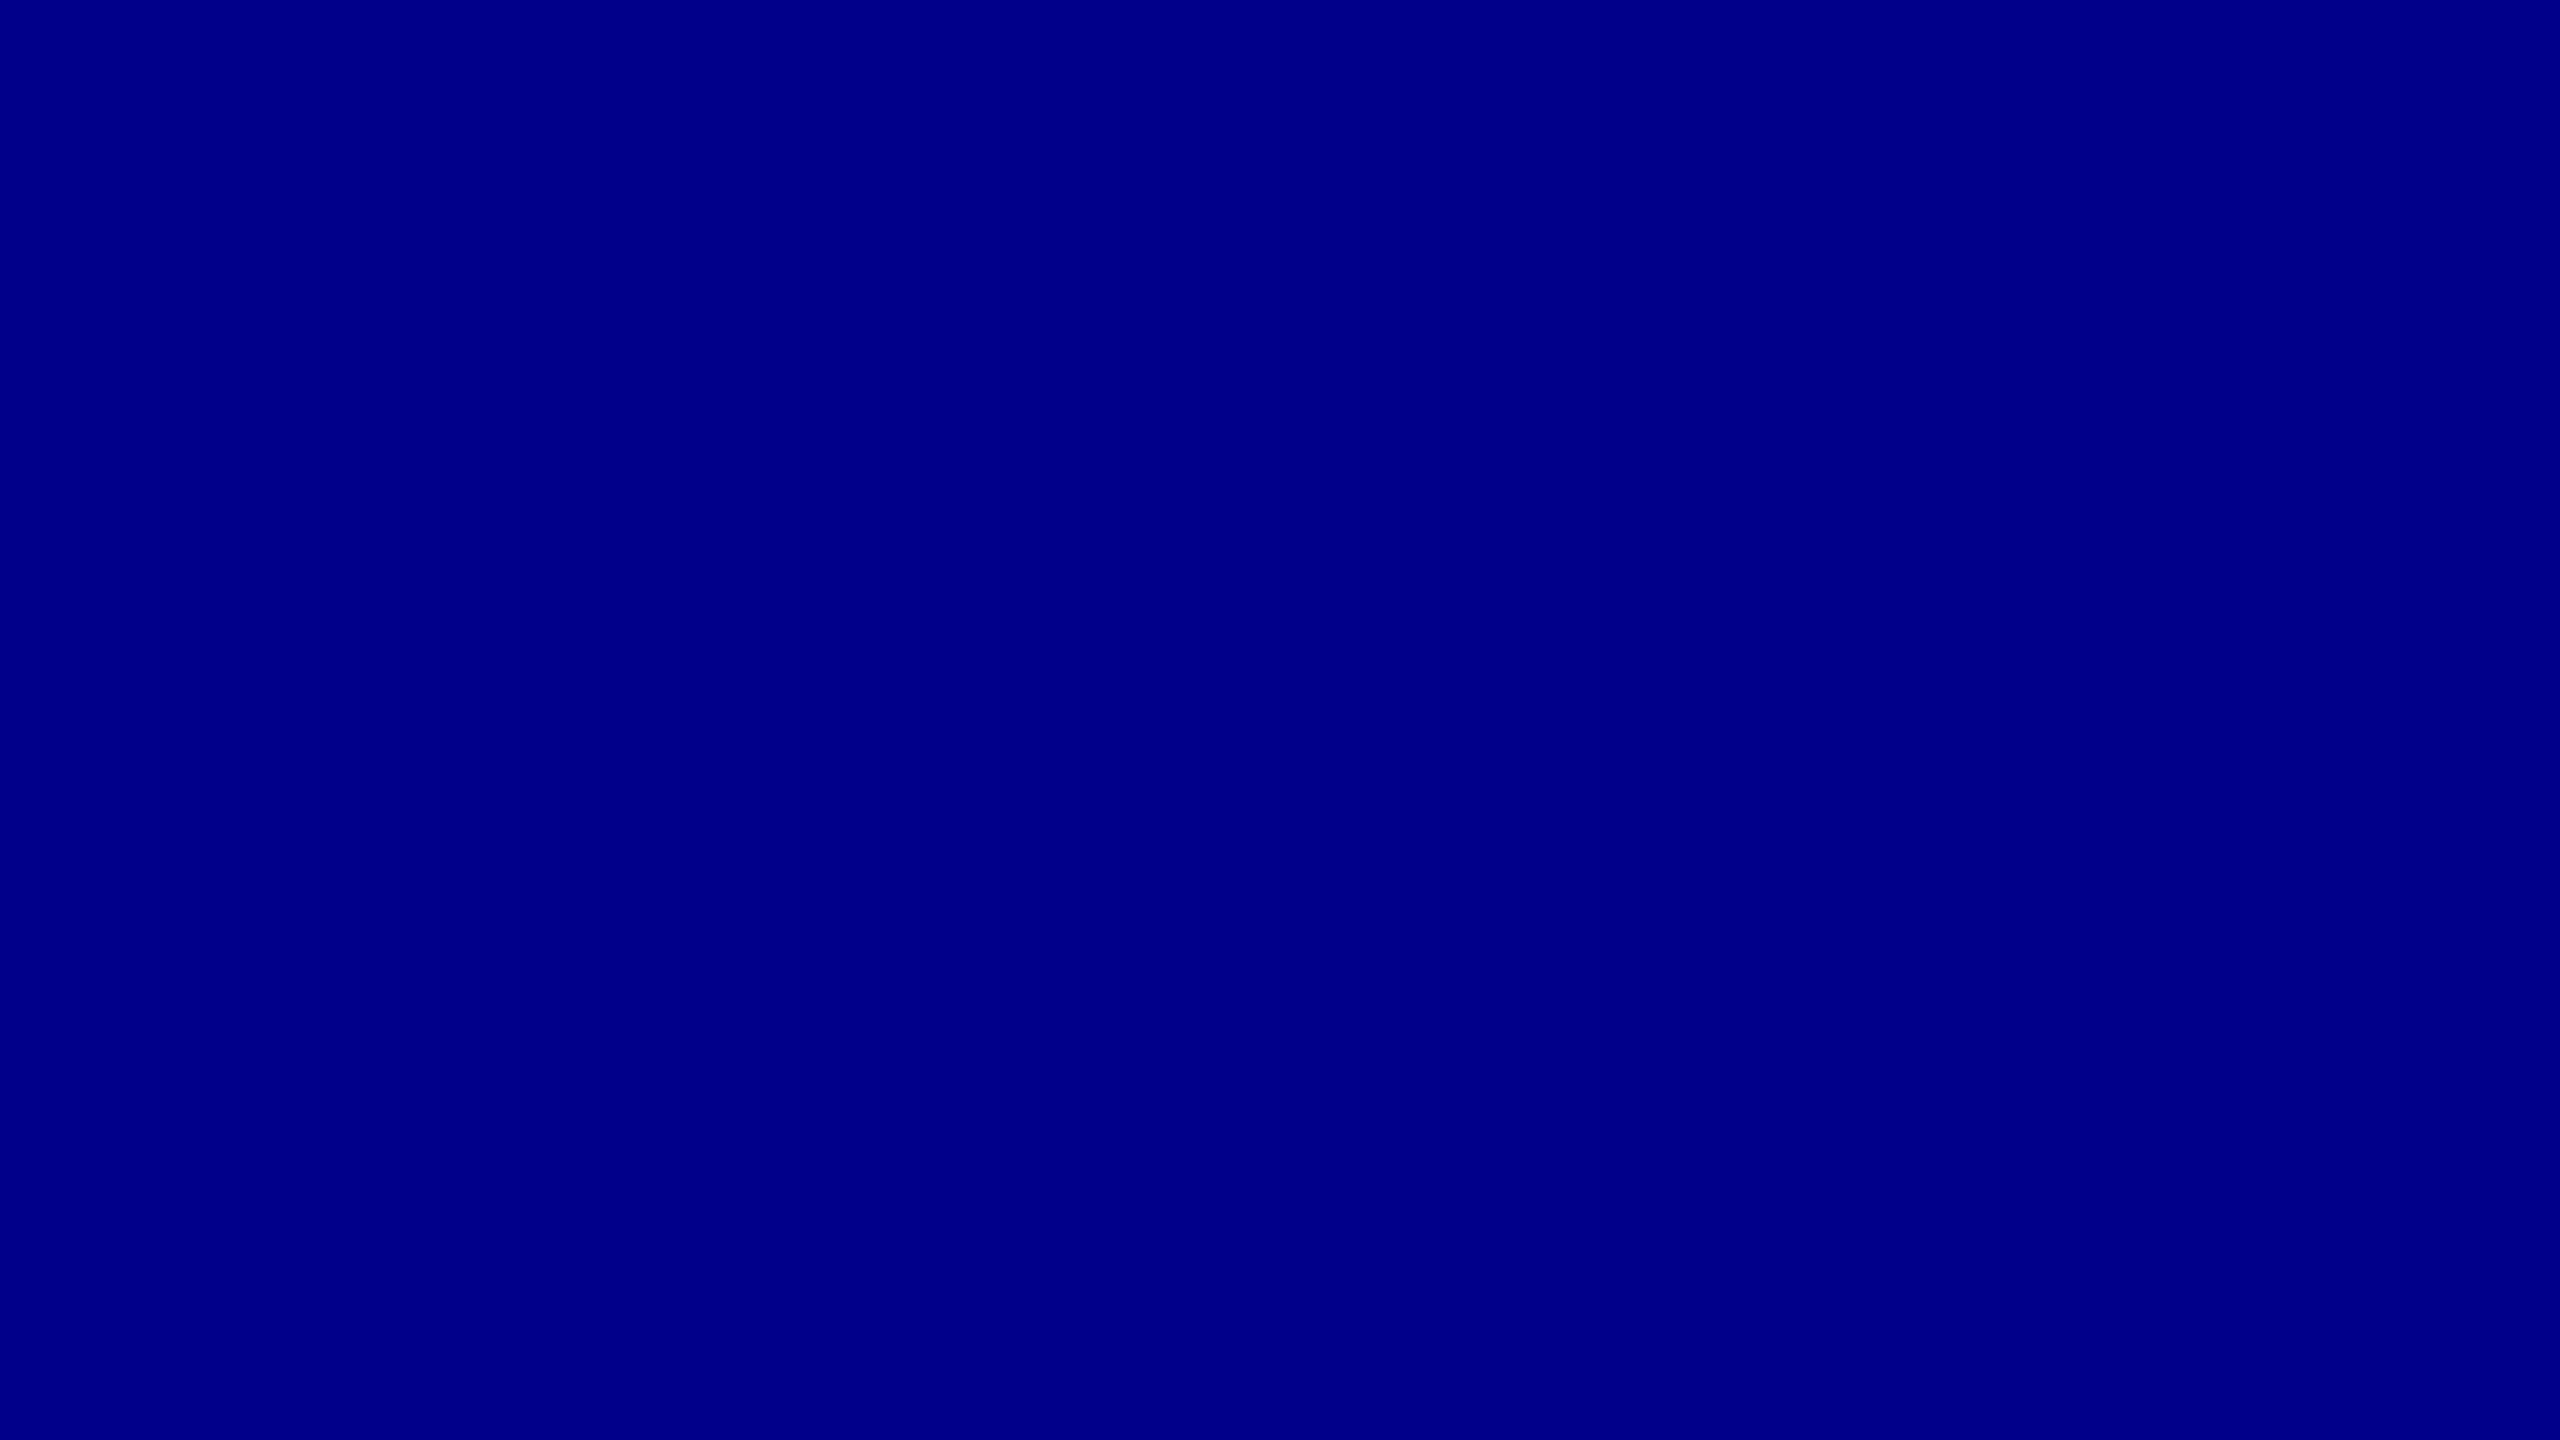 Dark Solid Blue Background Hd Wallpapers Pictures